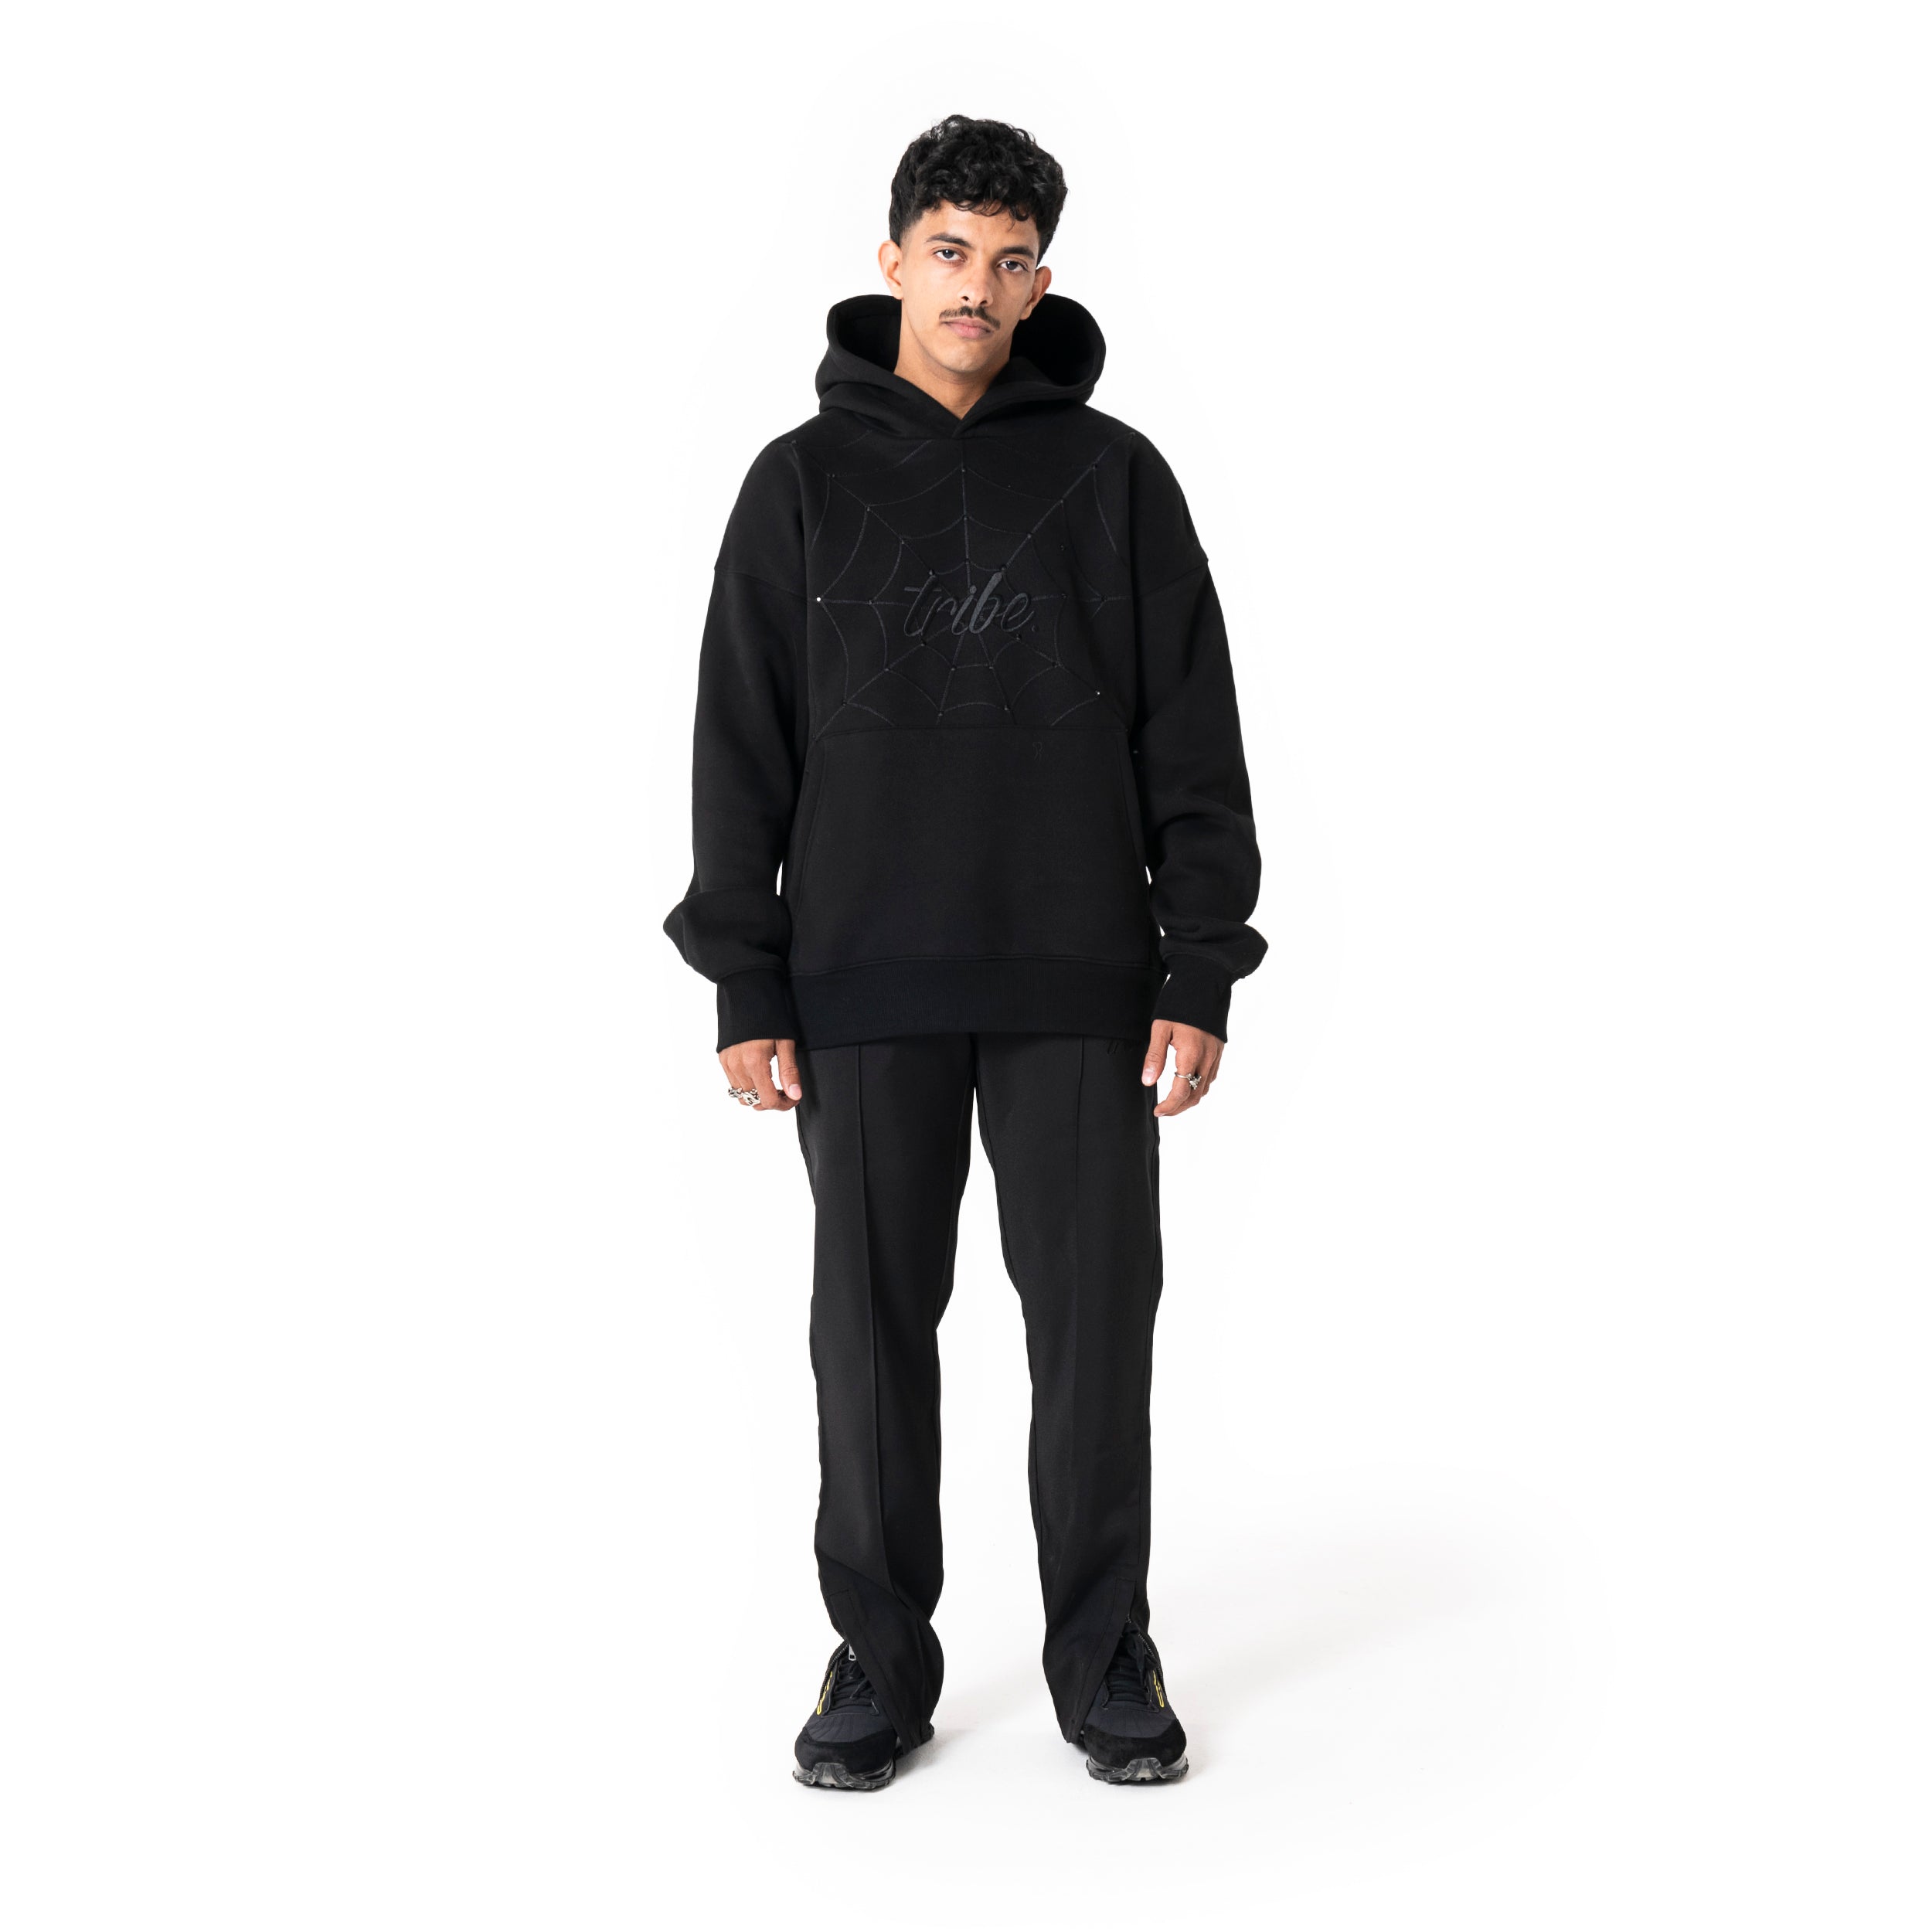 Black strass web hoodie From Tribe